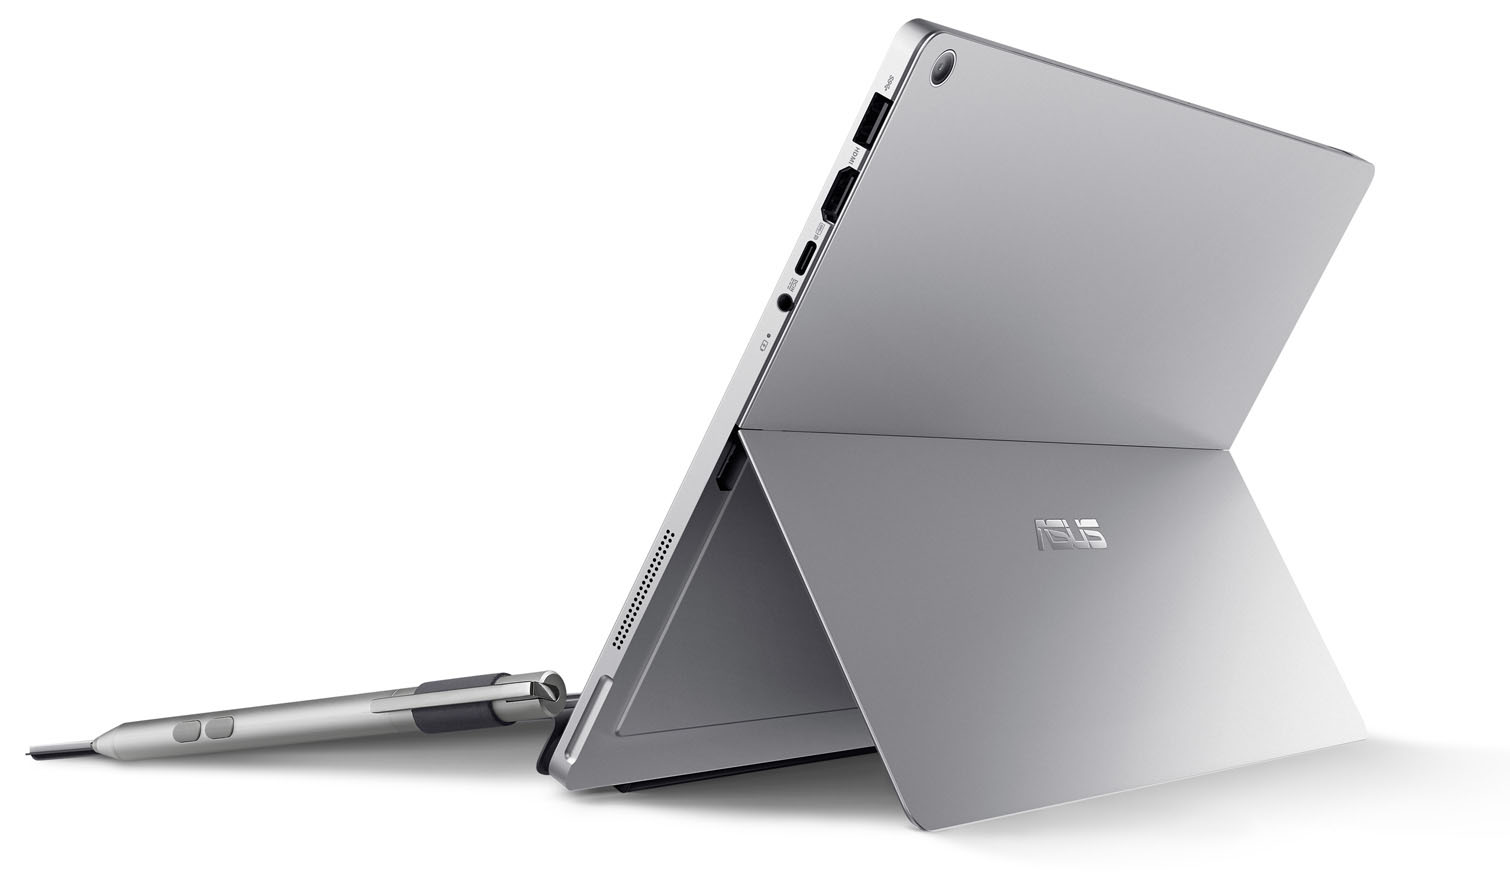 ASUS Transformer Pro (T304) - Specs, Tests, and Prices